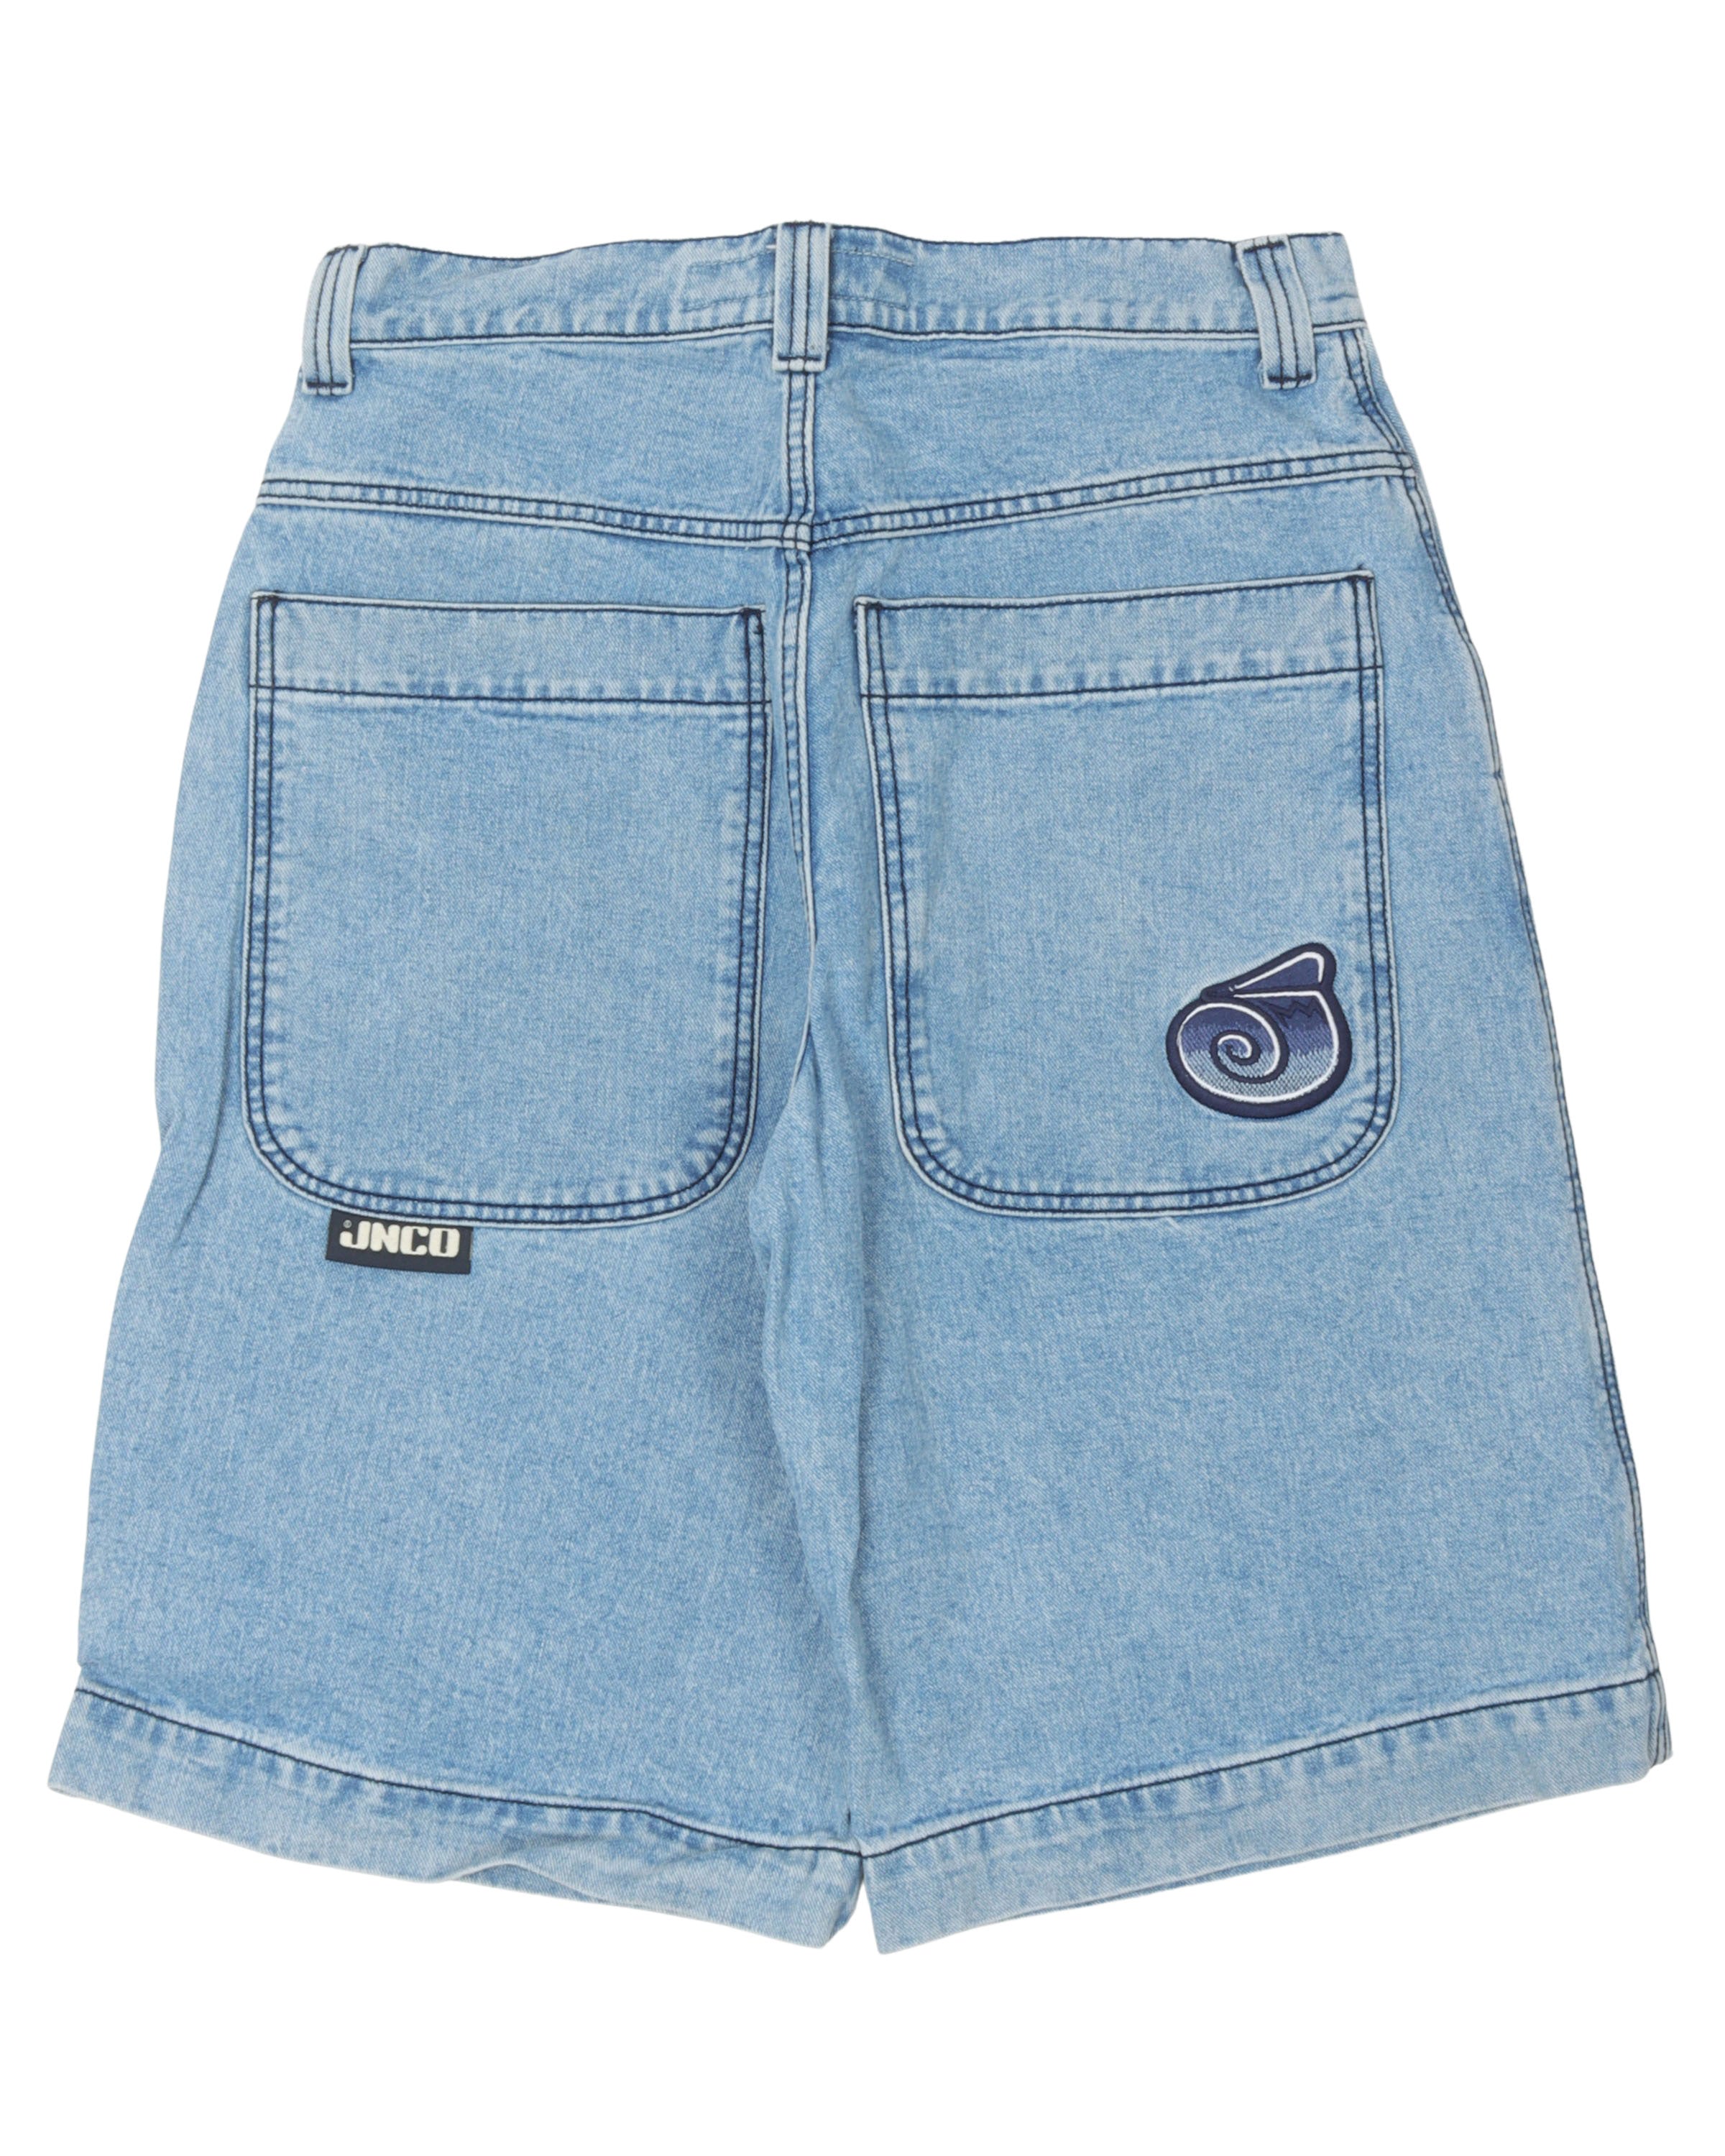 Jnco Baggy Jean Shorts